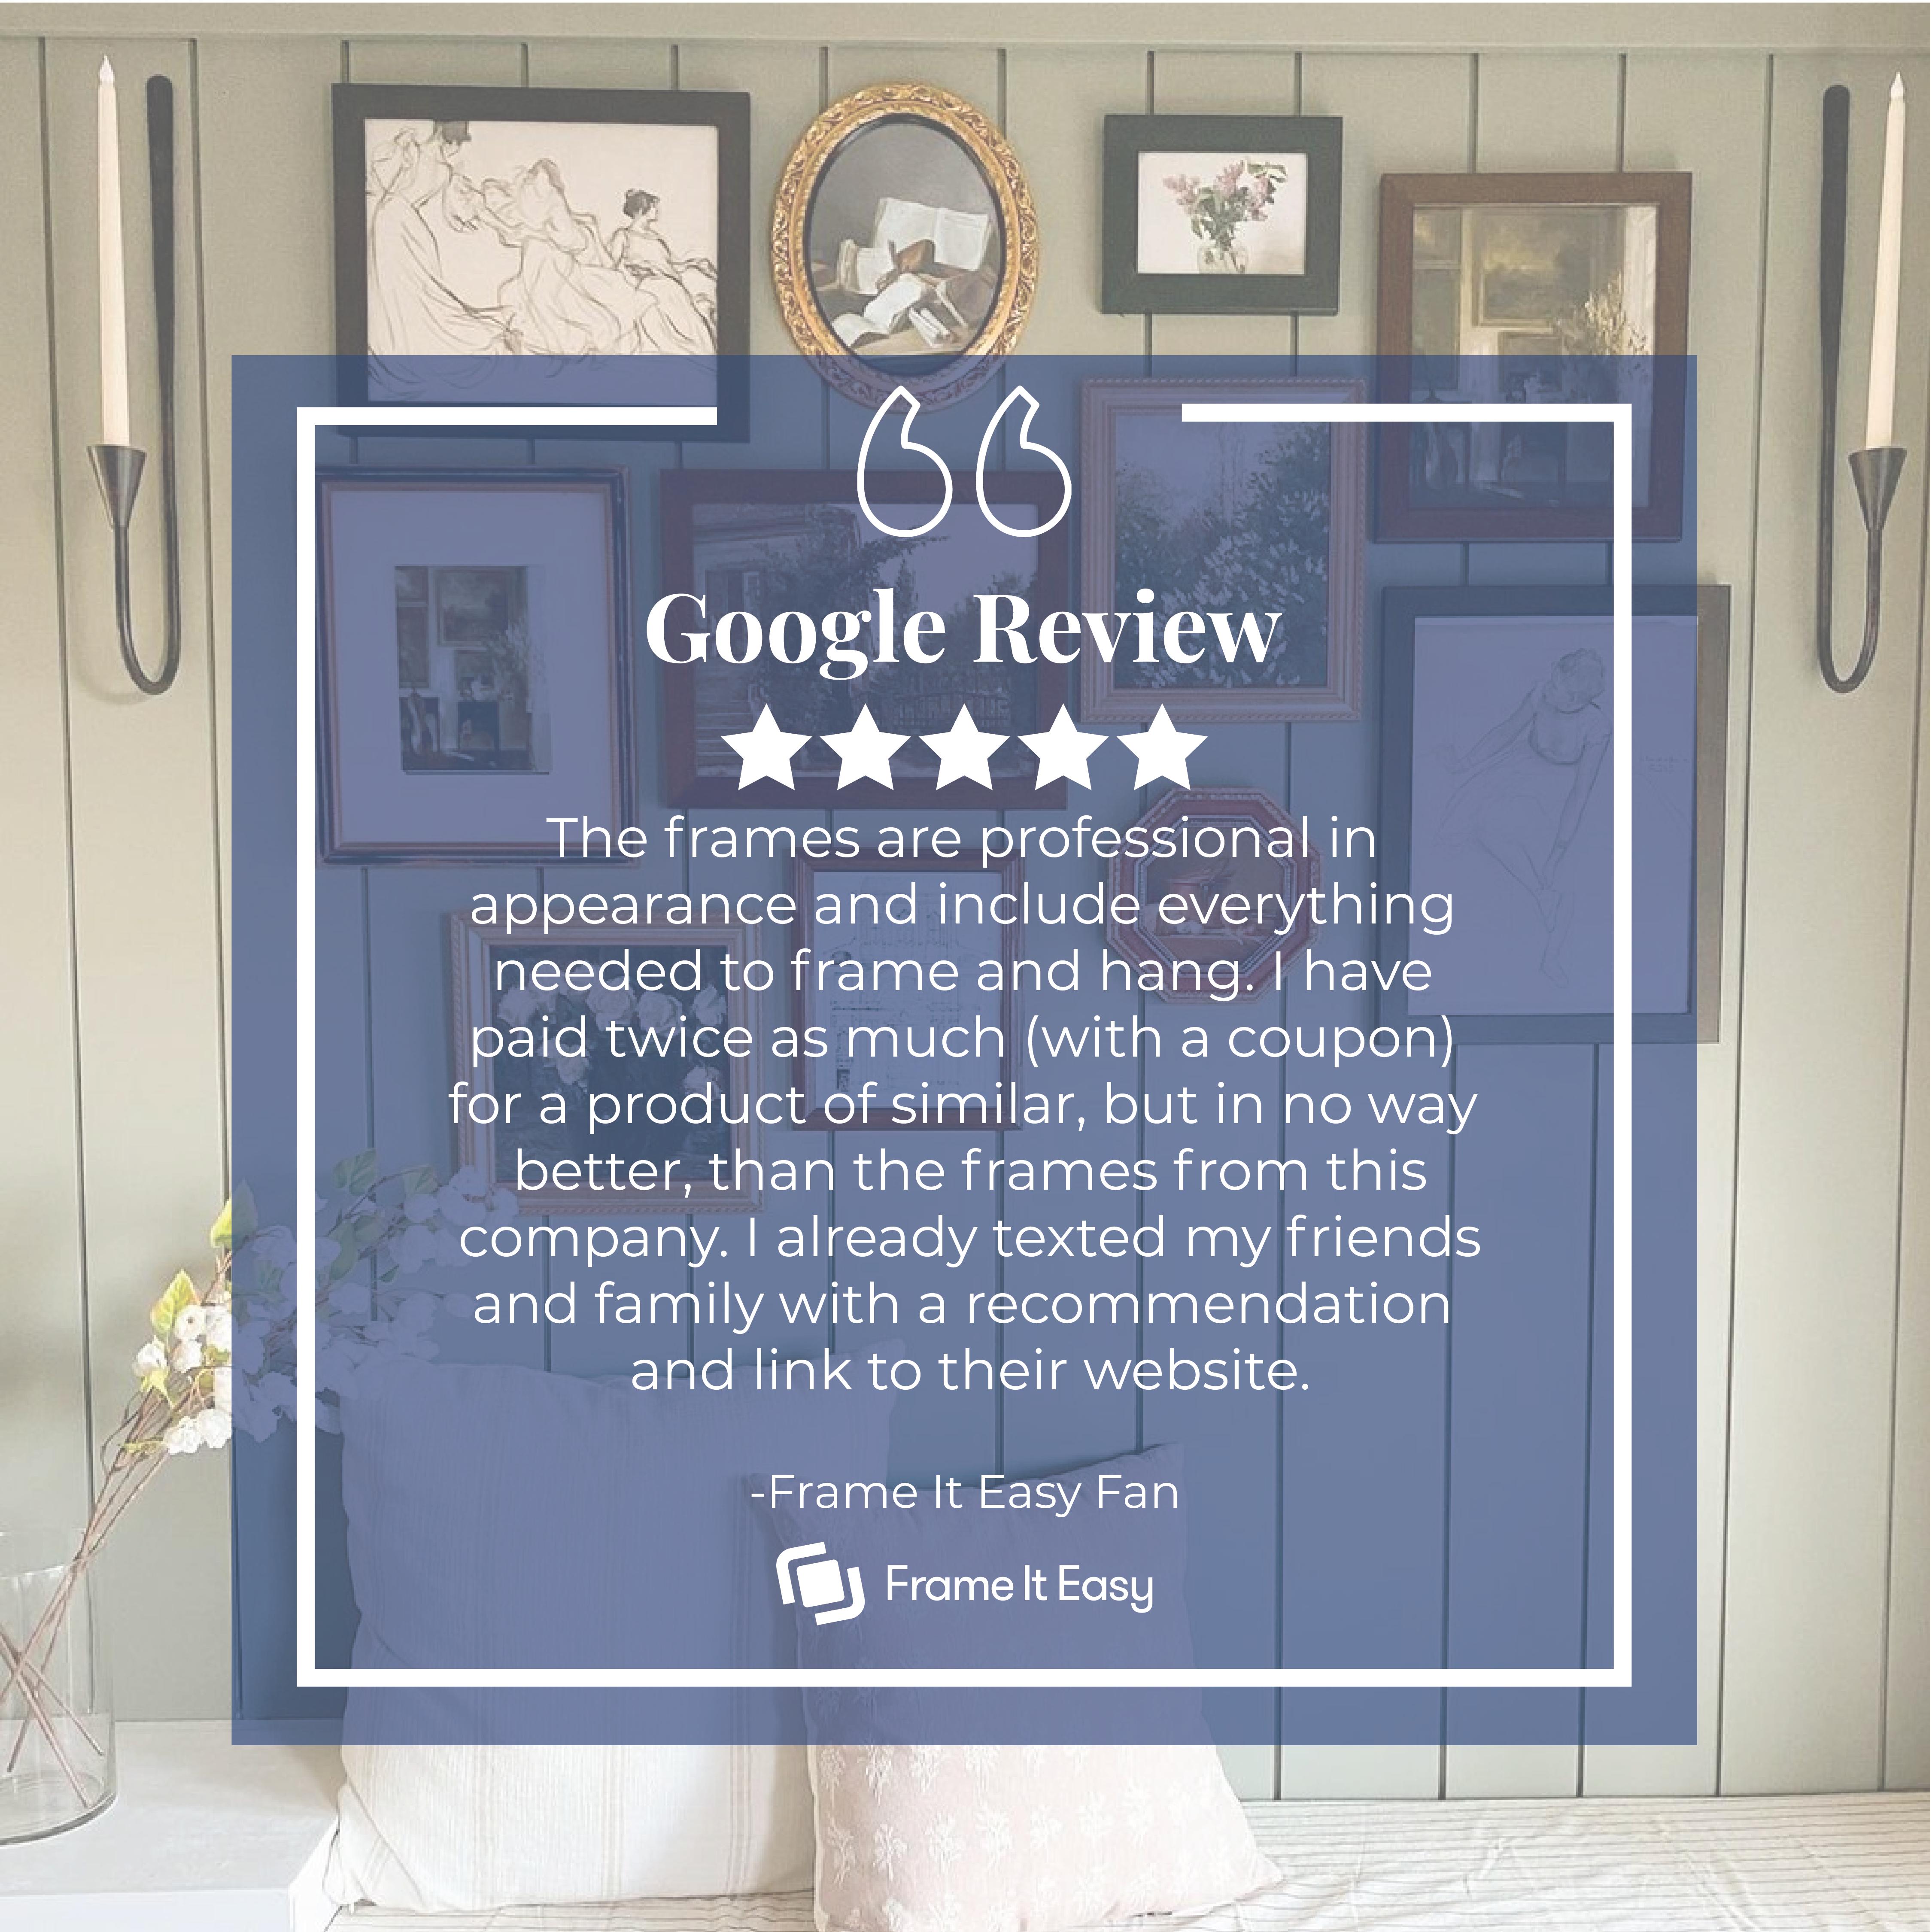 Creating A Frame It Easy Customer Account: A 5 star google review for Frame It Easy.